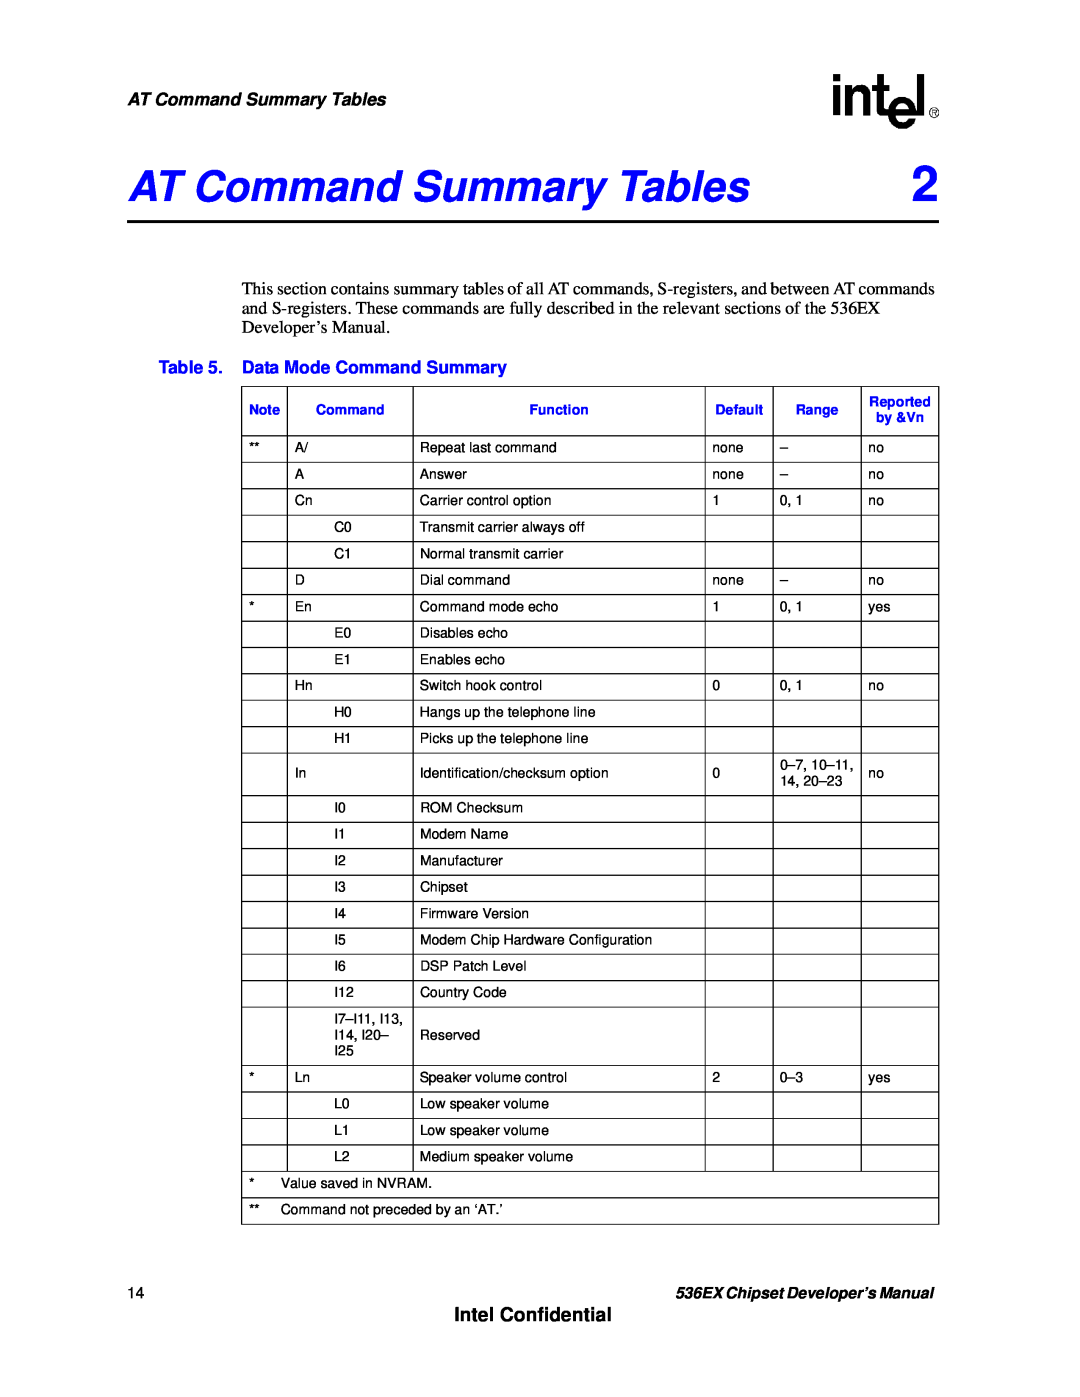 Intel manual AT Command Summary Tables, Intel Confidential, Data Mode Command Summary, 536EX Chipset Developer’s Manual 